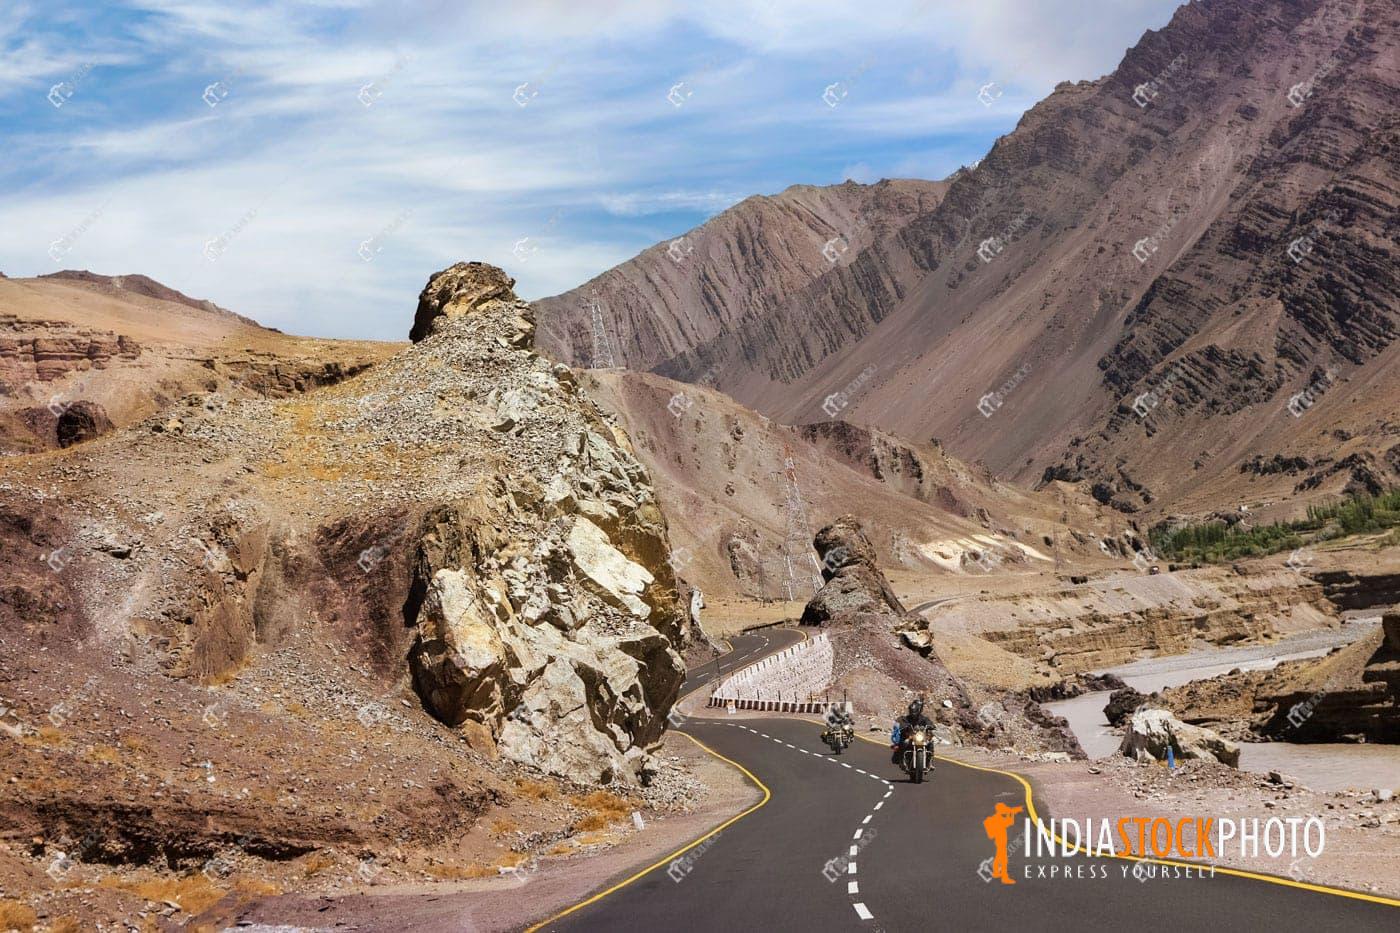 Ladakh landscape with Indian bikers on mountain highway